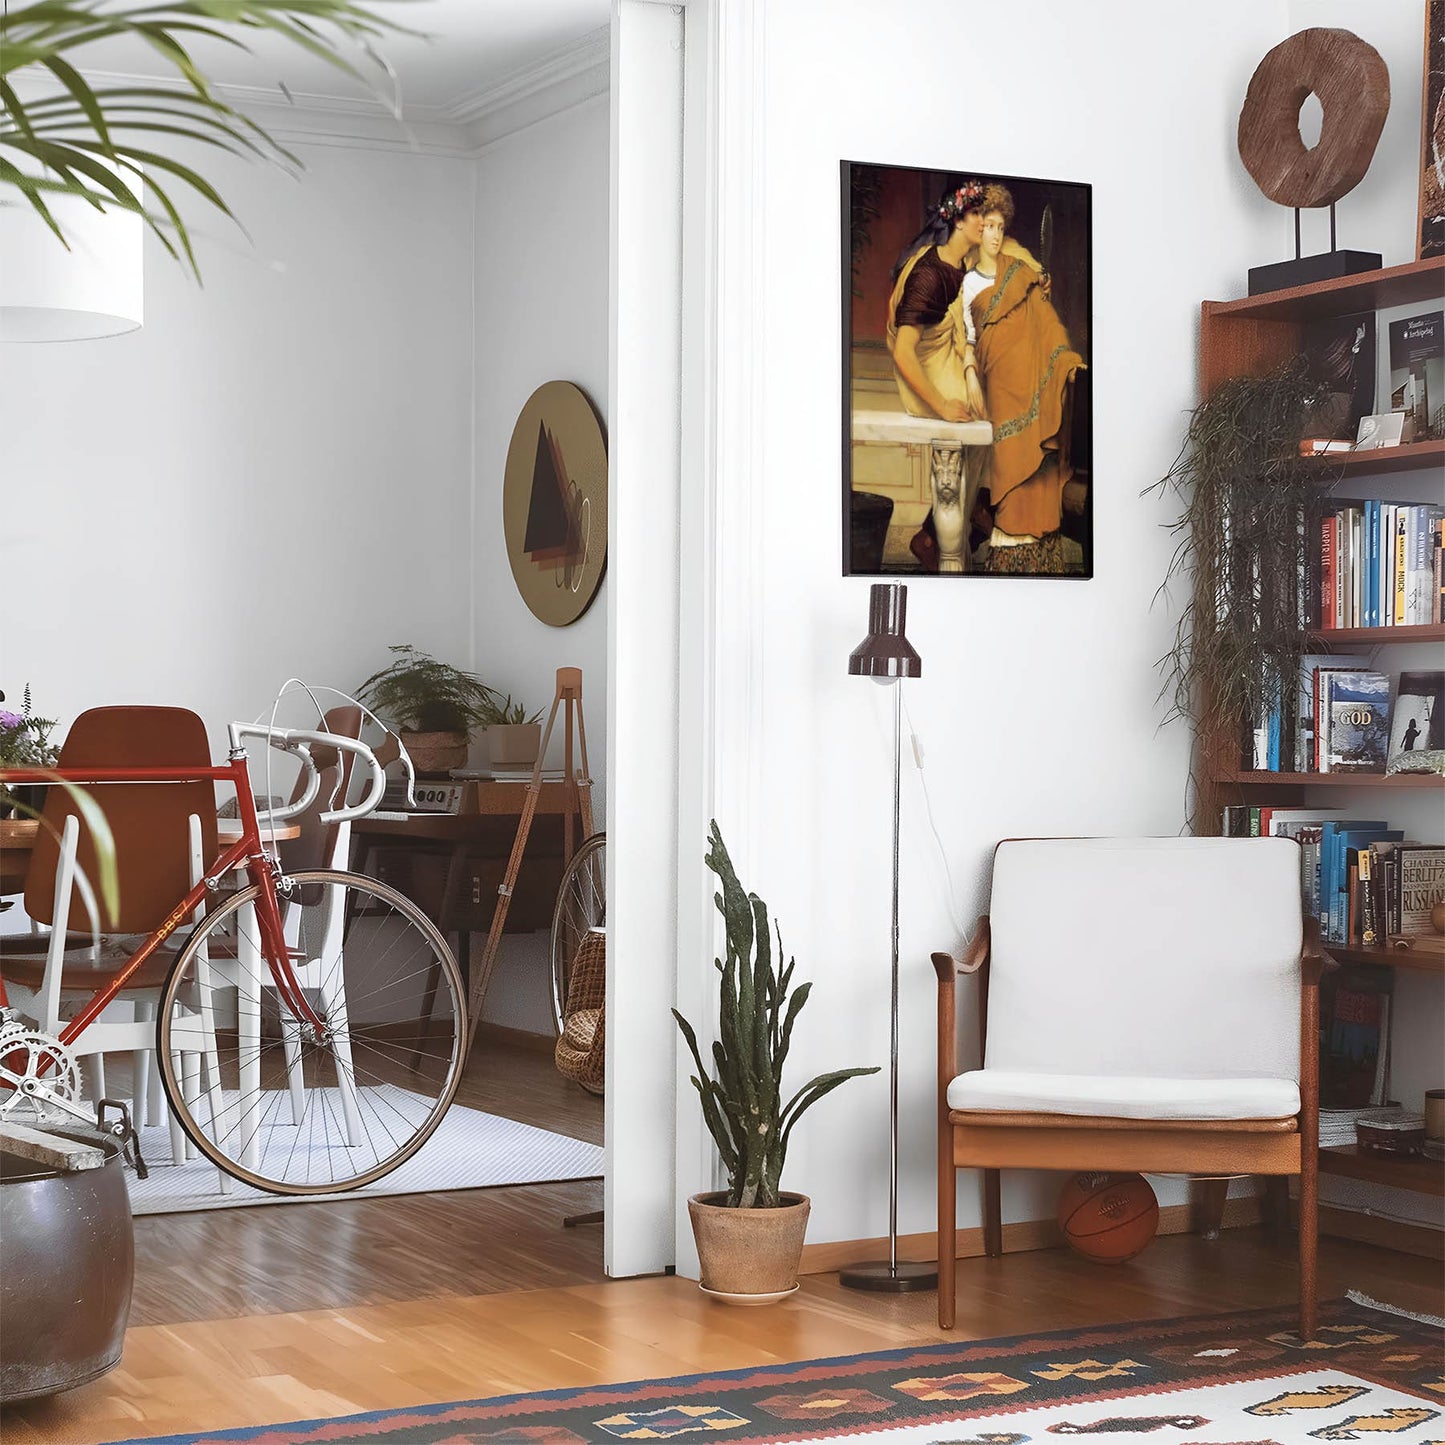 Eclectic living room with a road bike, bookshelf and house plants that features framed artwork of a Two Young Lovers above a chair and lamp